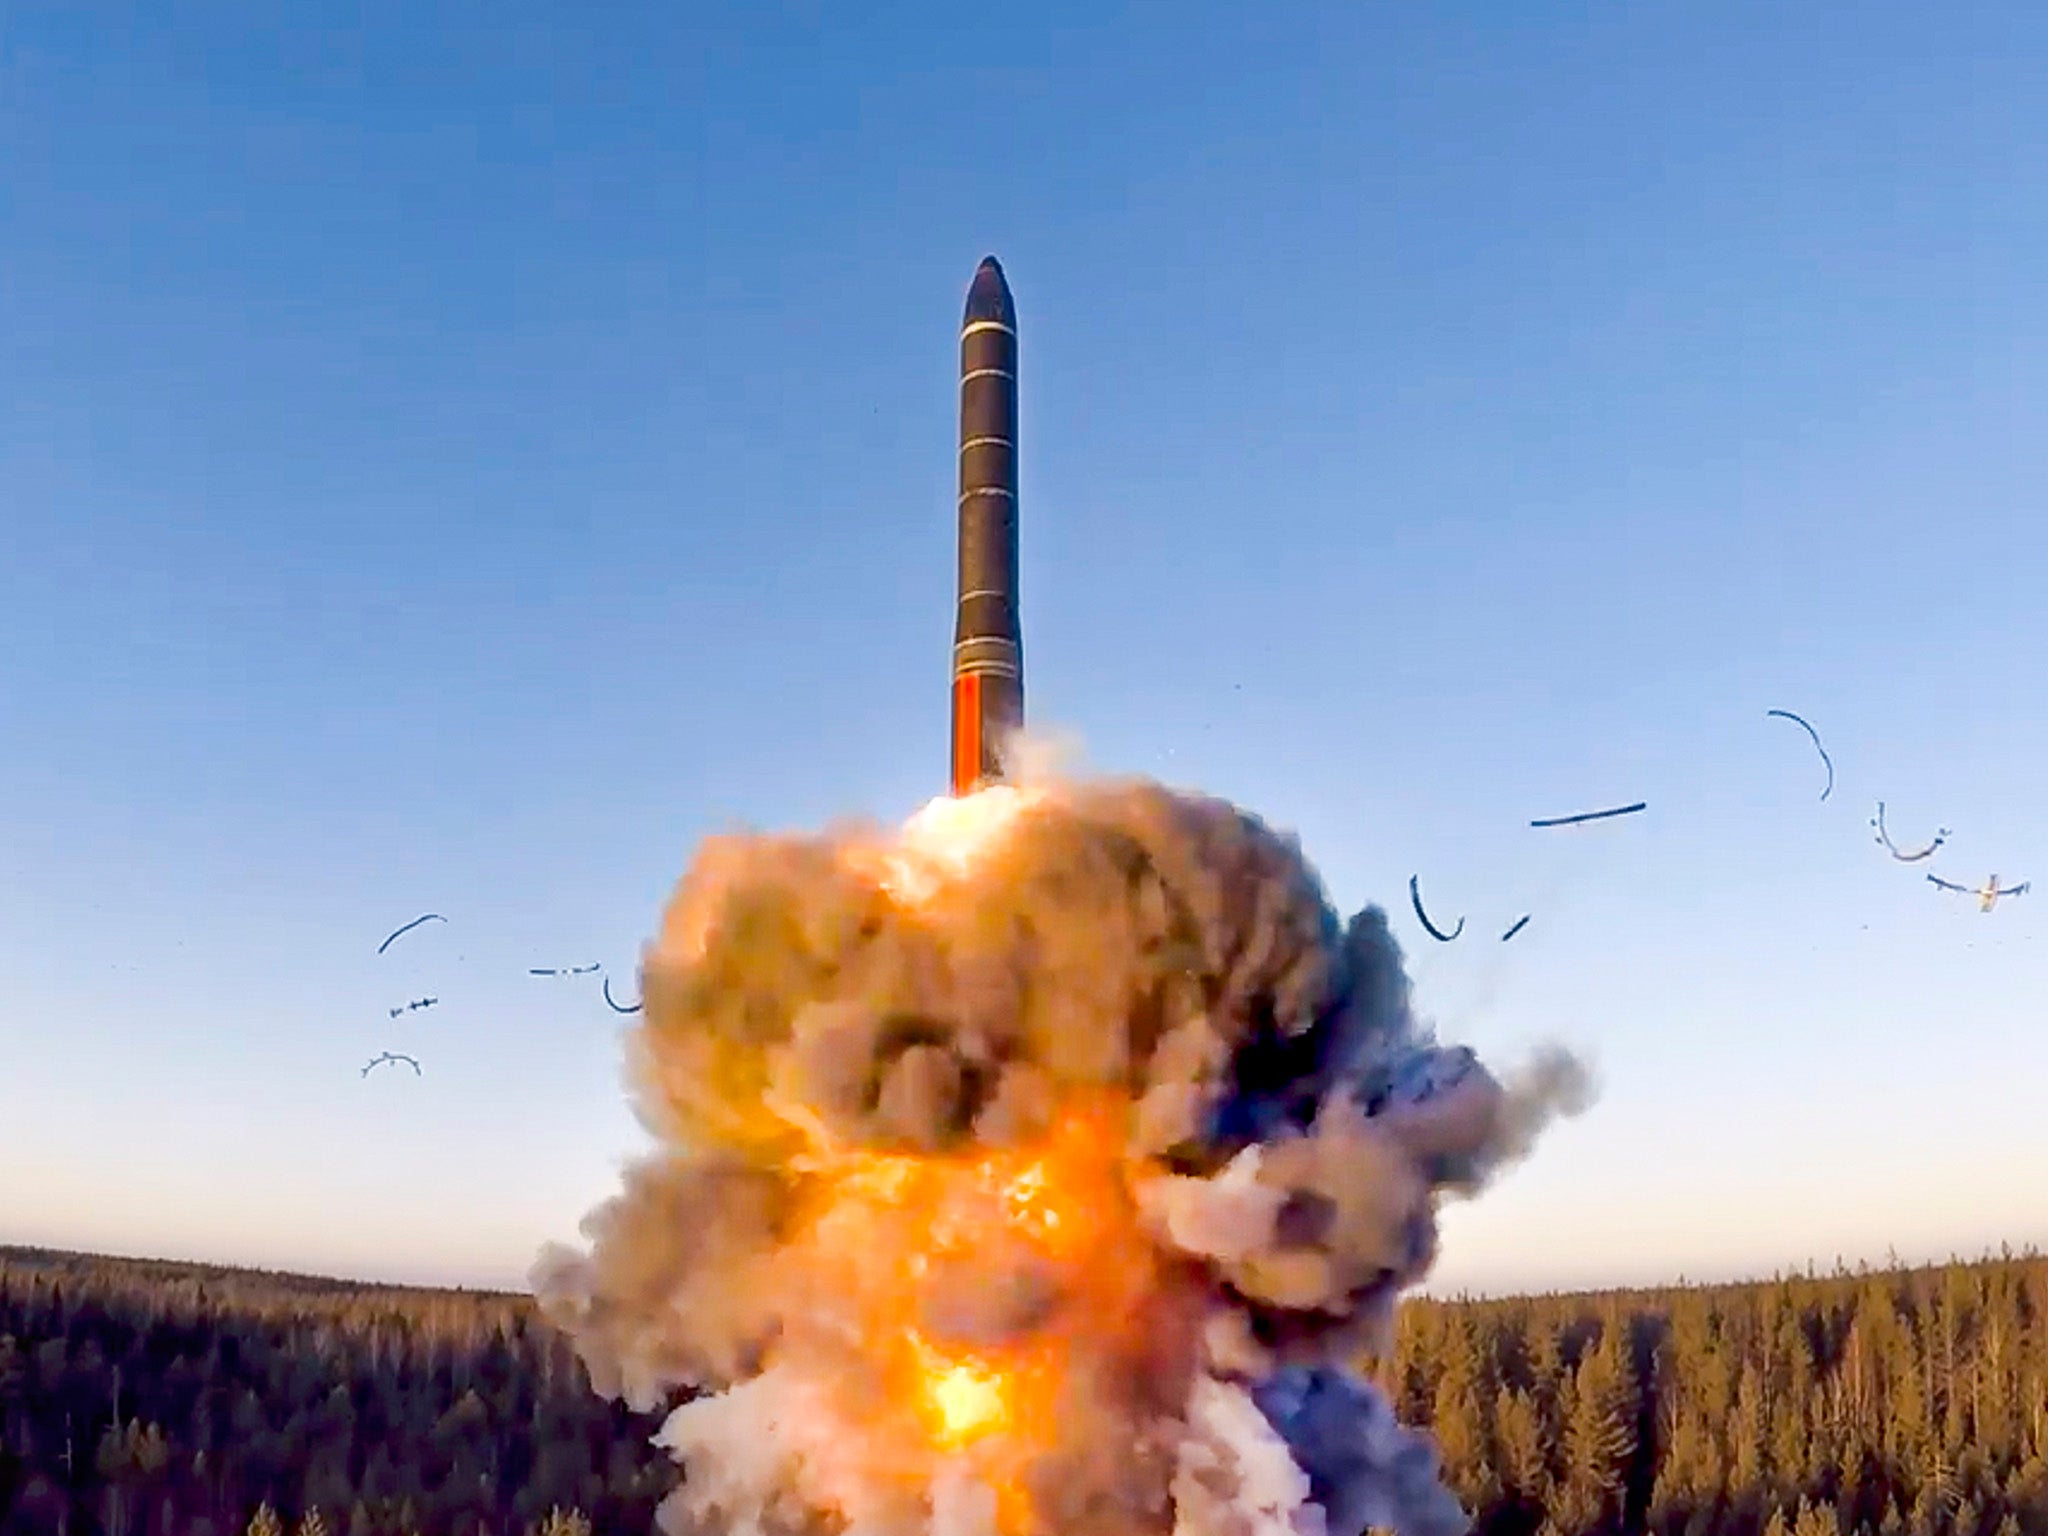 FILE - In this file photo taken from a video distributed by Russian Defense Ministry Press Service, on Dec. 9, 2020, a rocket launches from missile system as part of a ground-based intercontinental ballistic missile test launched from the Plesetsk facility in northwestern Russia